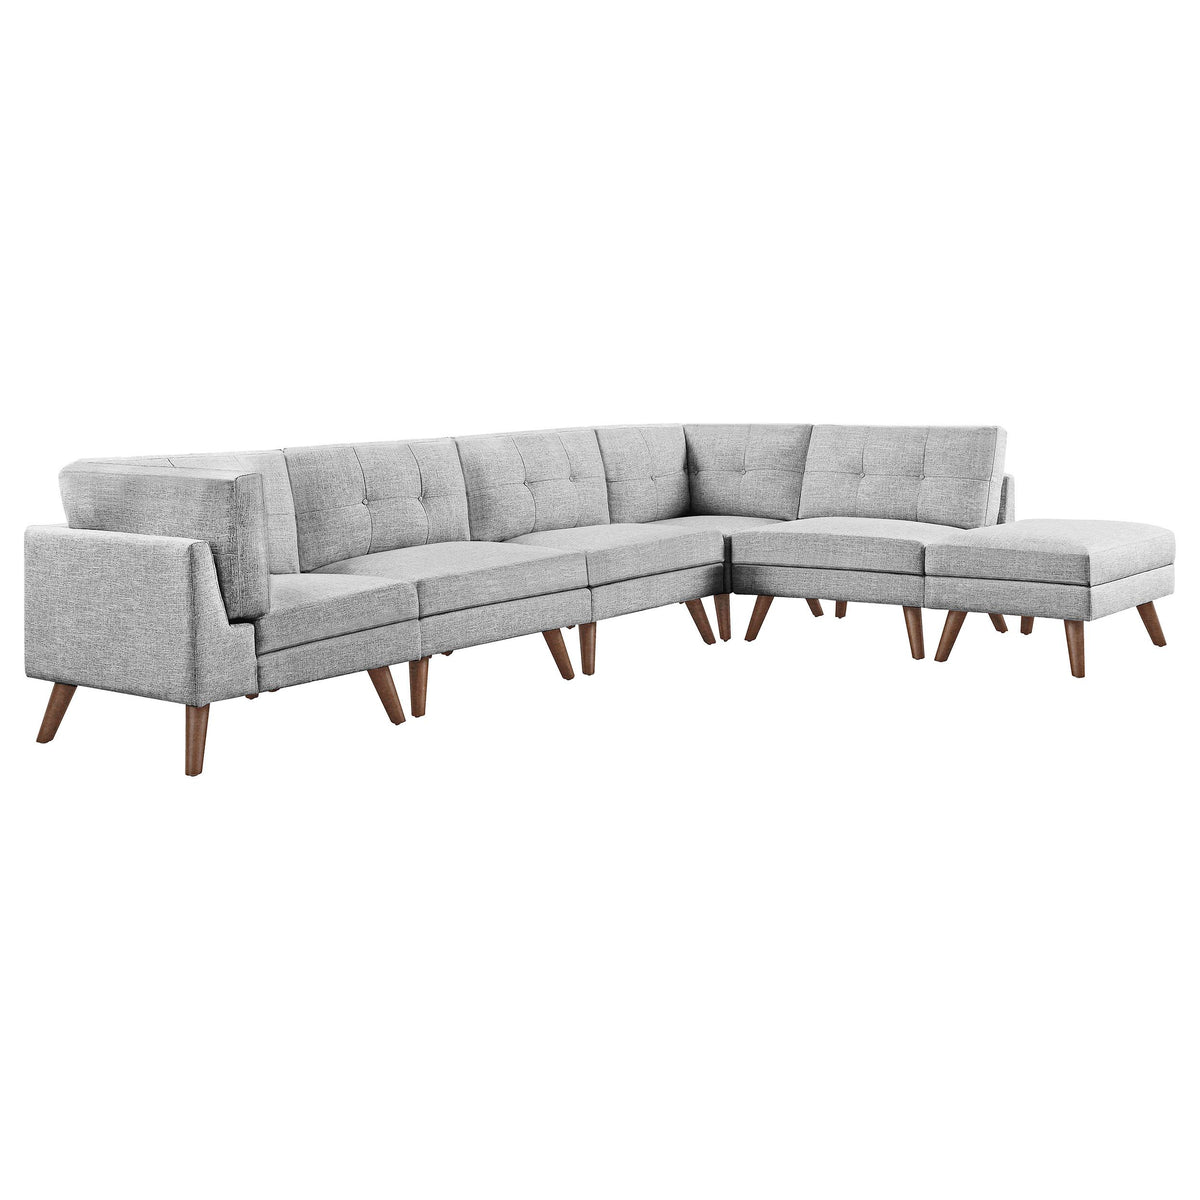 Churchill 6-piece Upholstered Modular Tufted Sectional Grey and Walnut  Las Vegas Furniture Stores